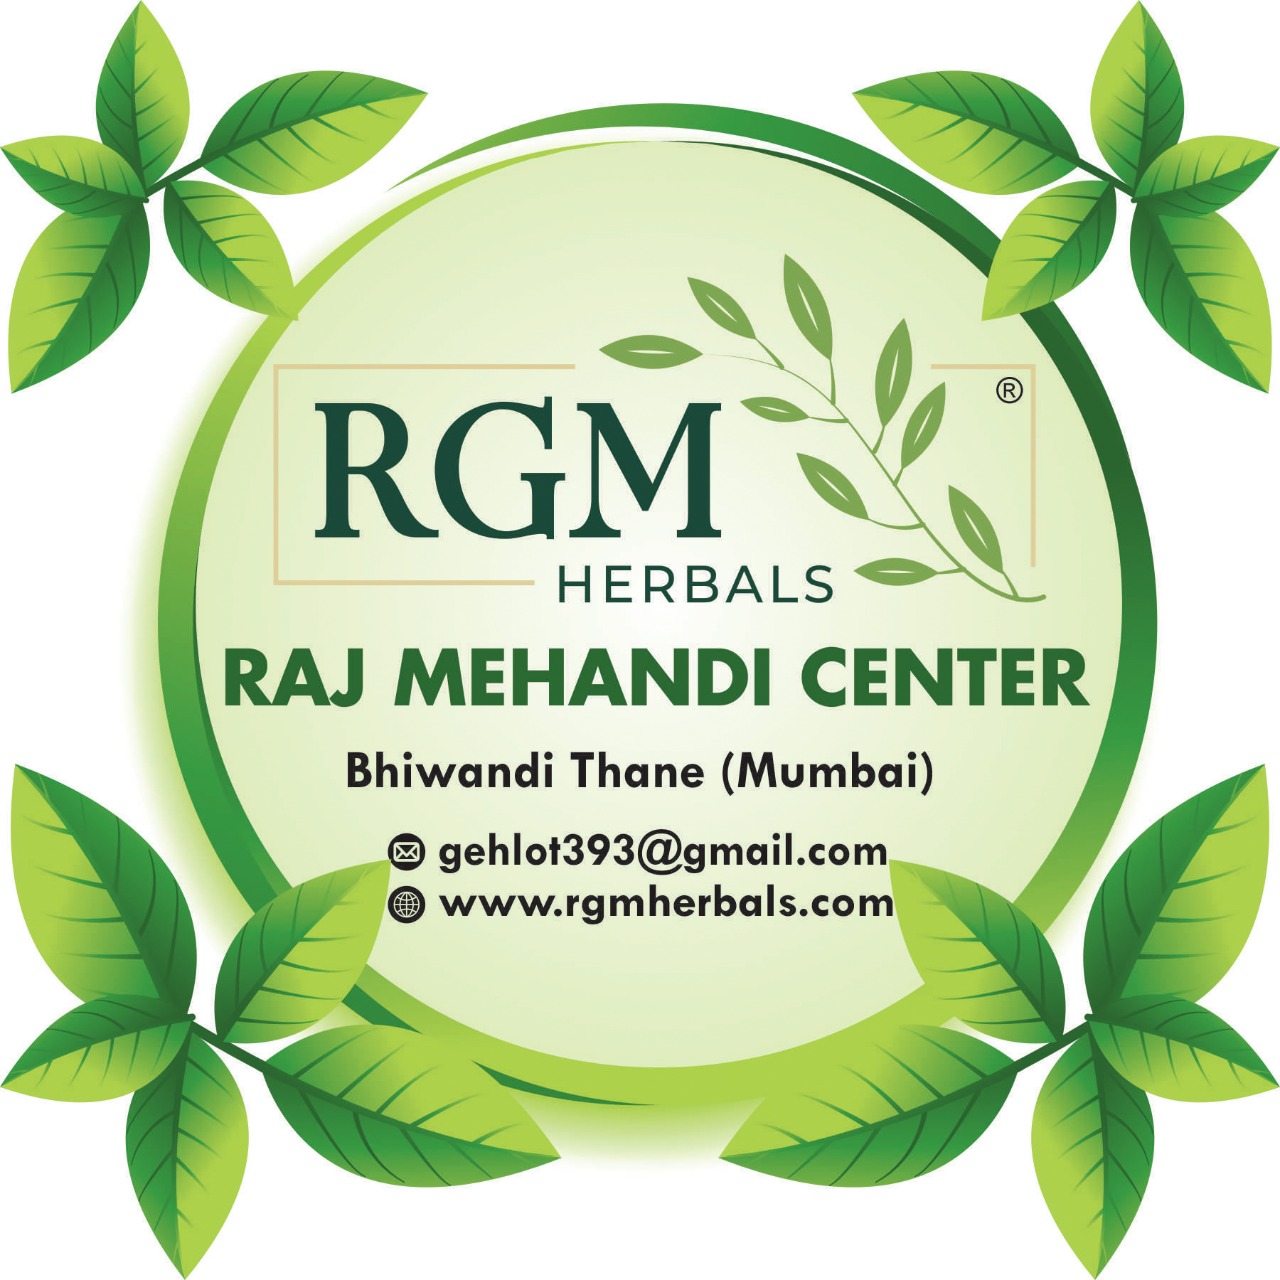 RGM Herbals and Henna products